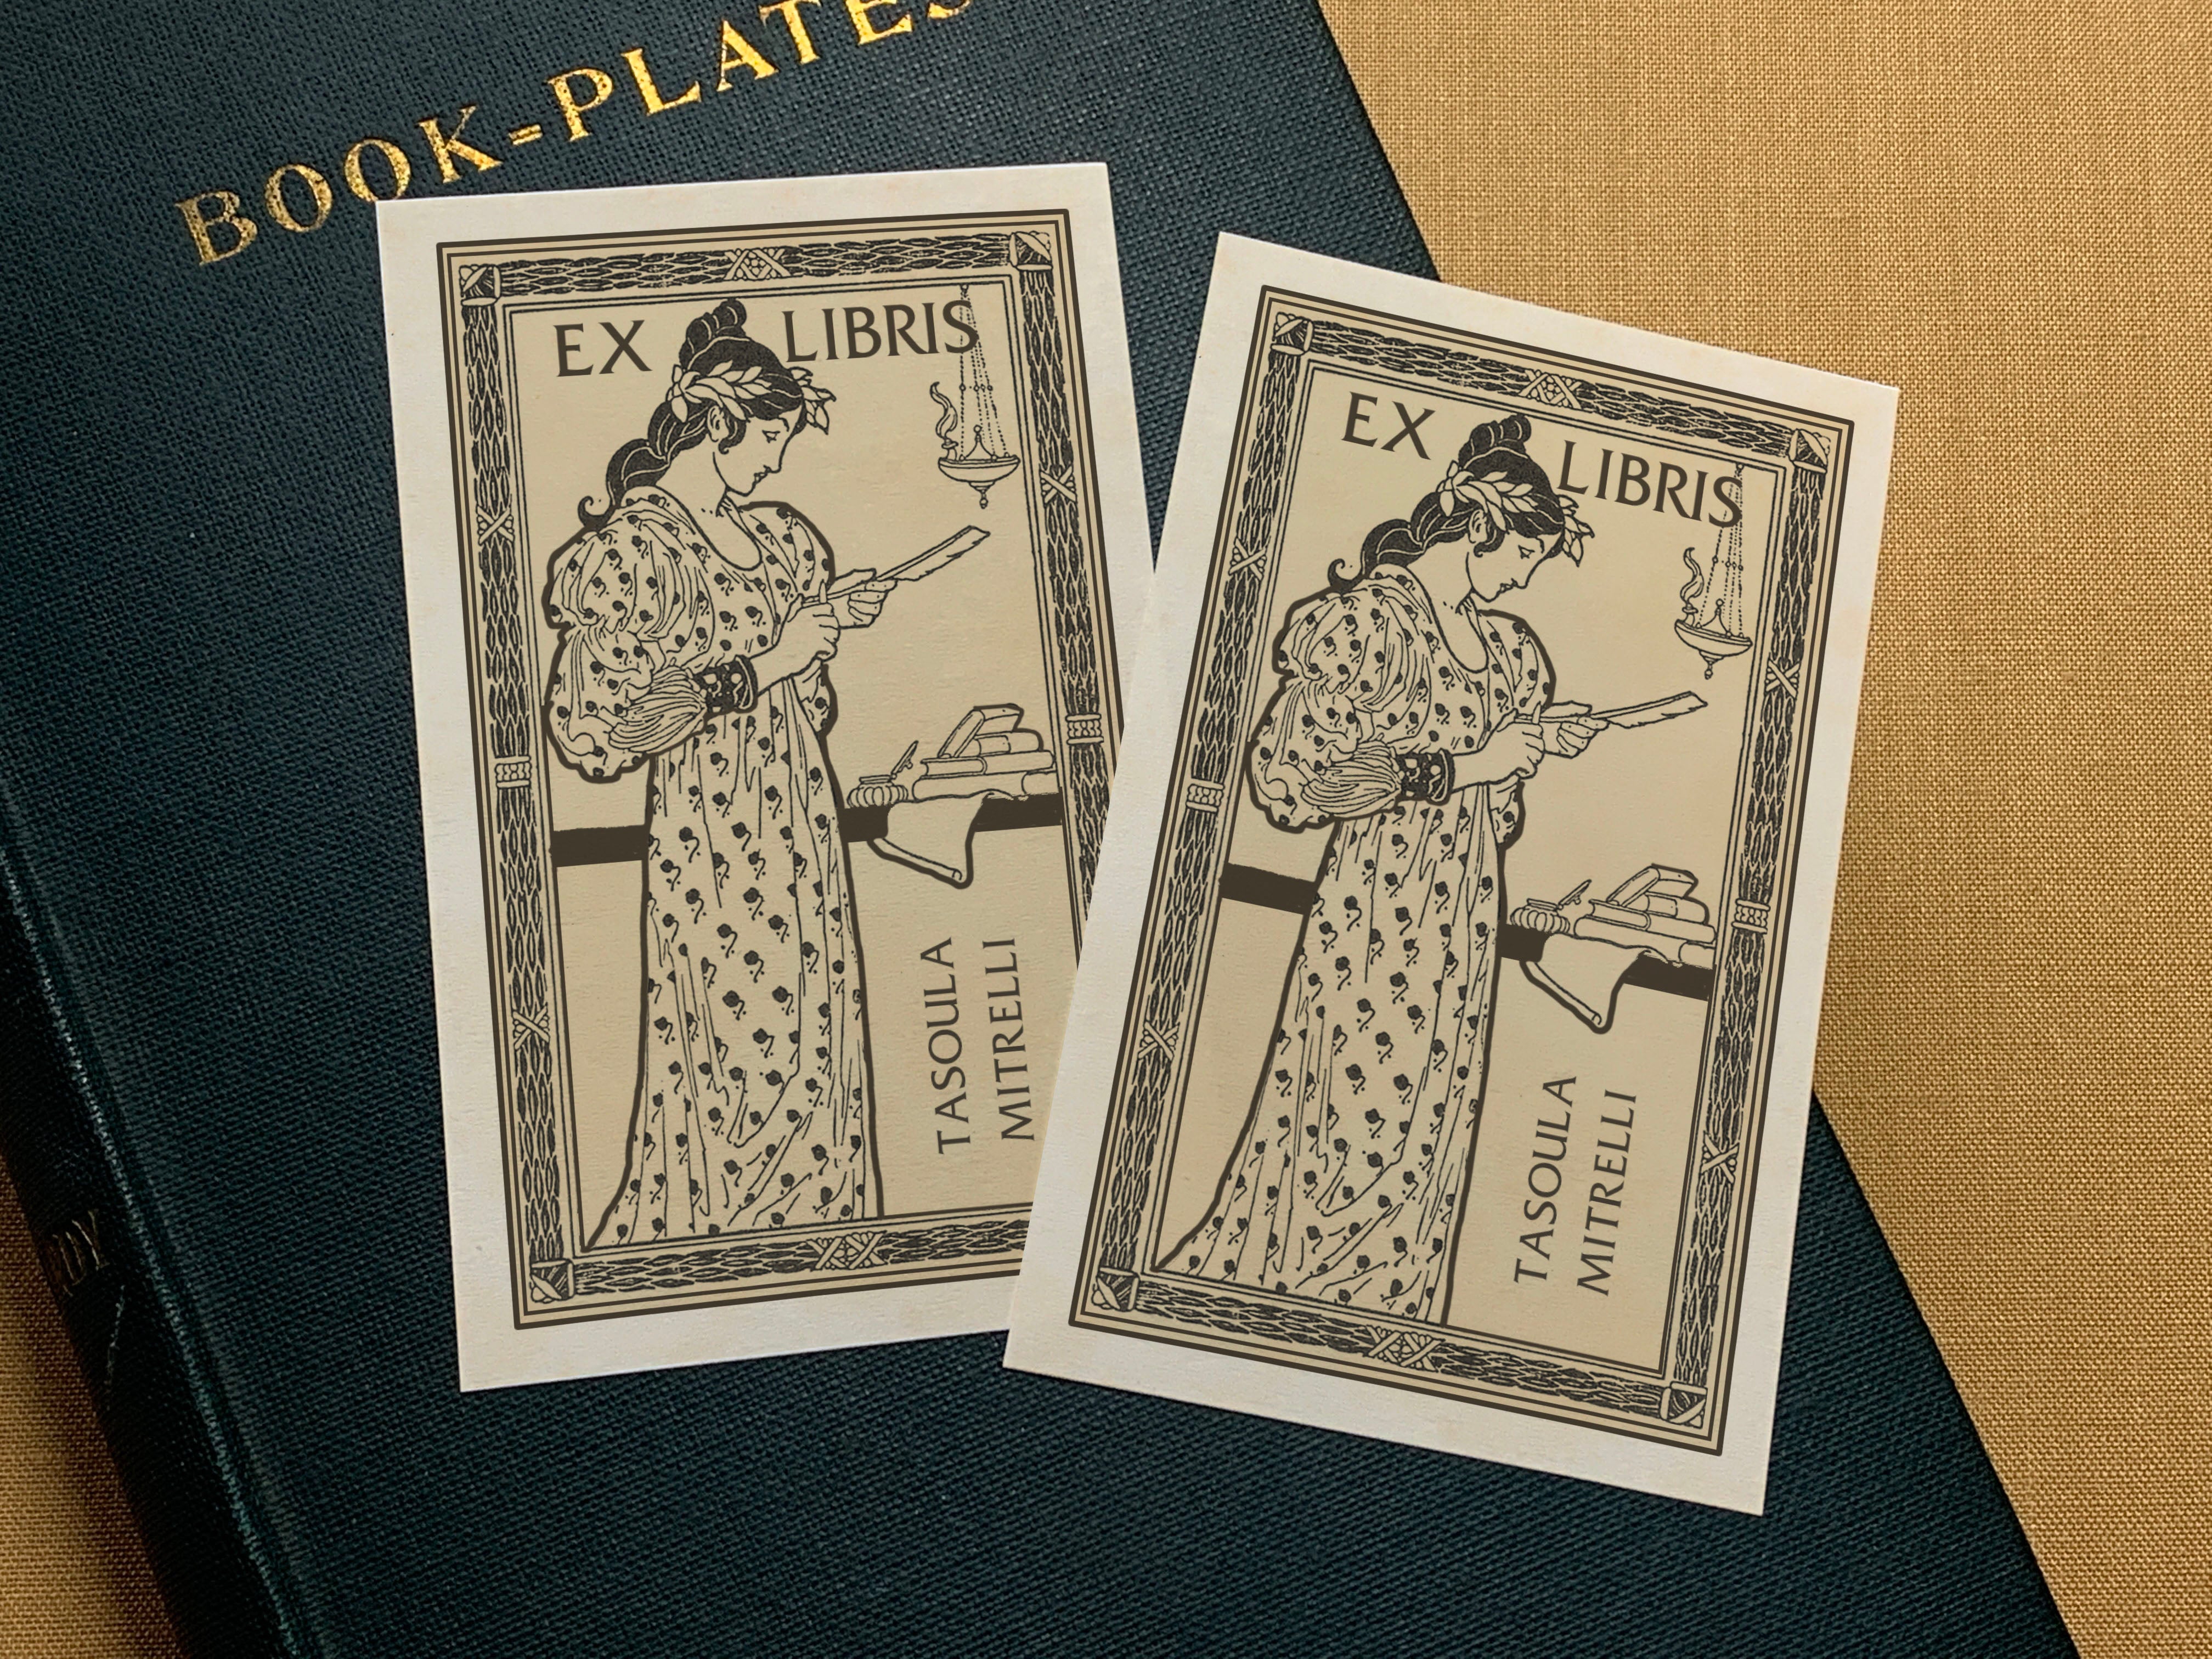 Sappho, Personalized Ex-Libris Bookplates, Crafted on Traditional Gummed Paper, 2.5in x 4in, Set of 30